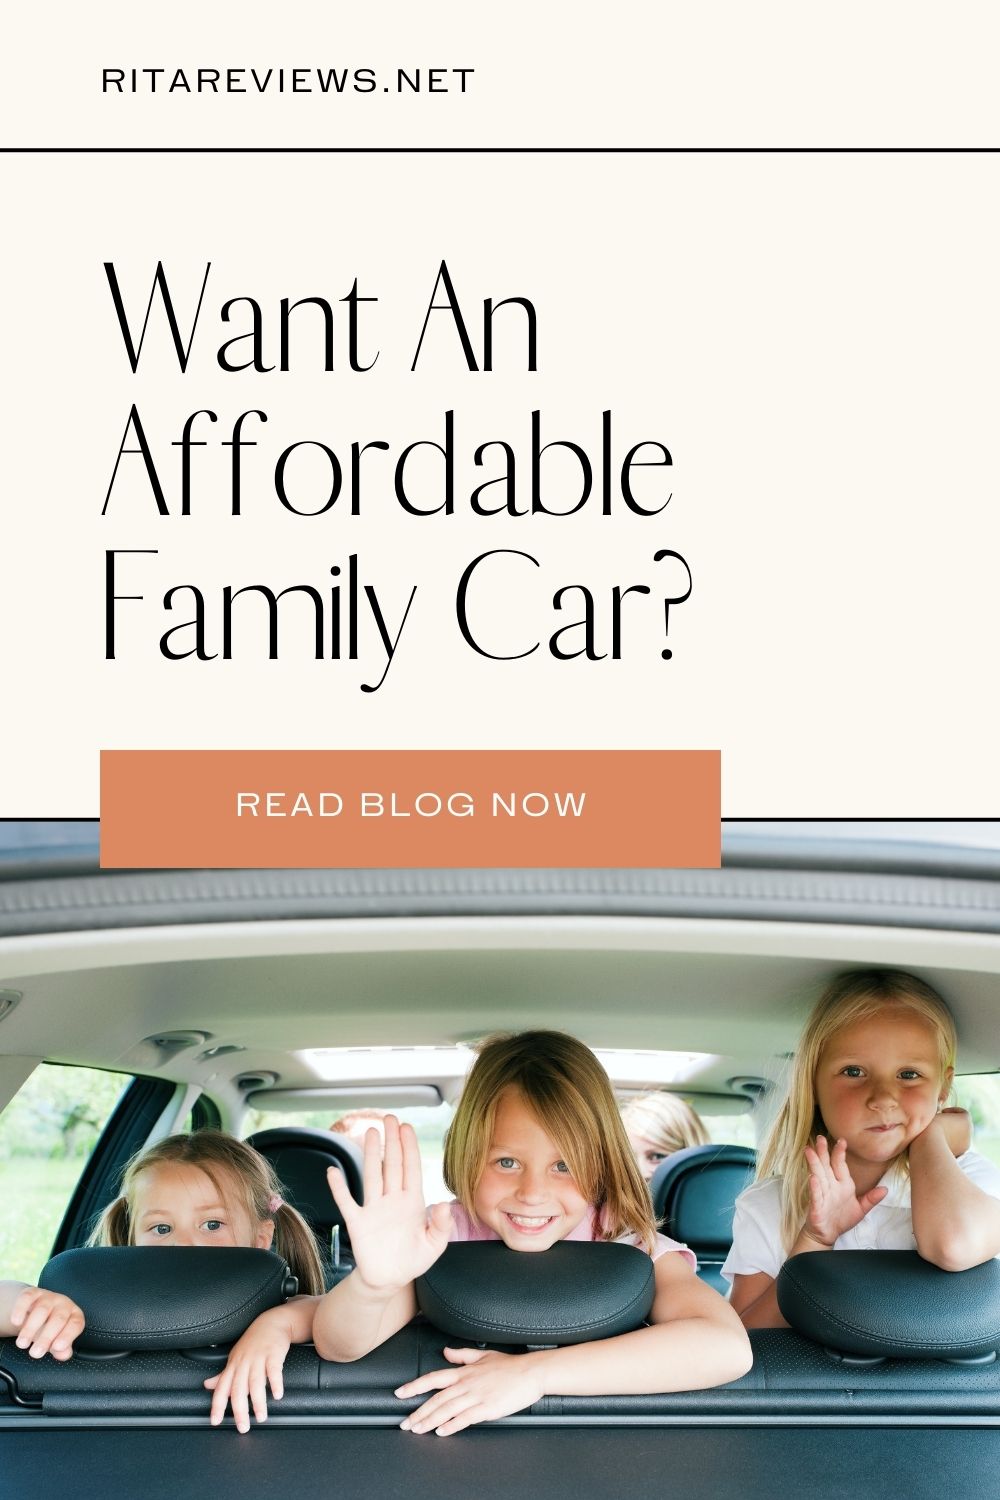 Want An Affordable Family Car Here's What You Need To Know